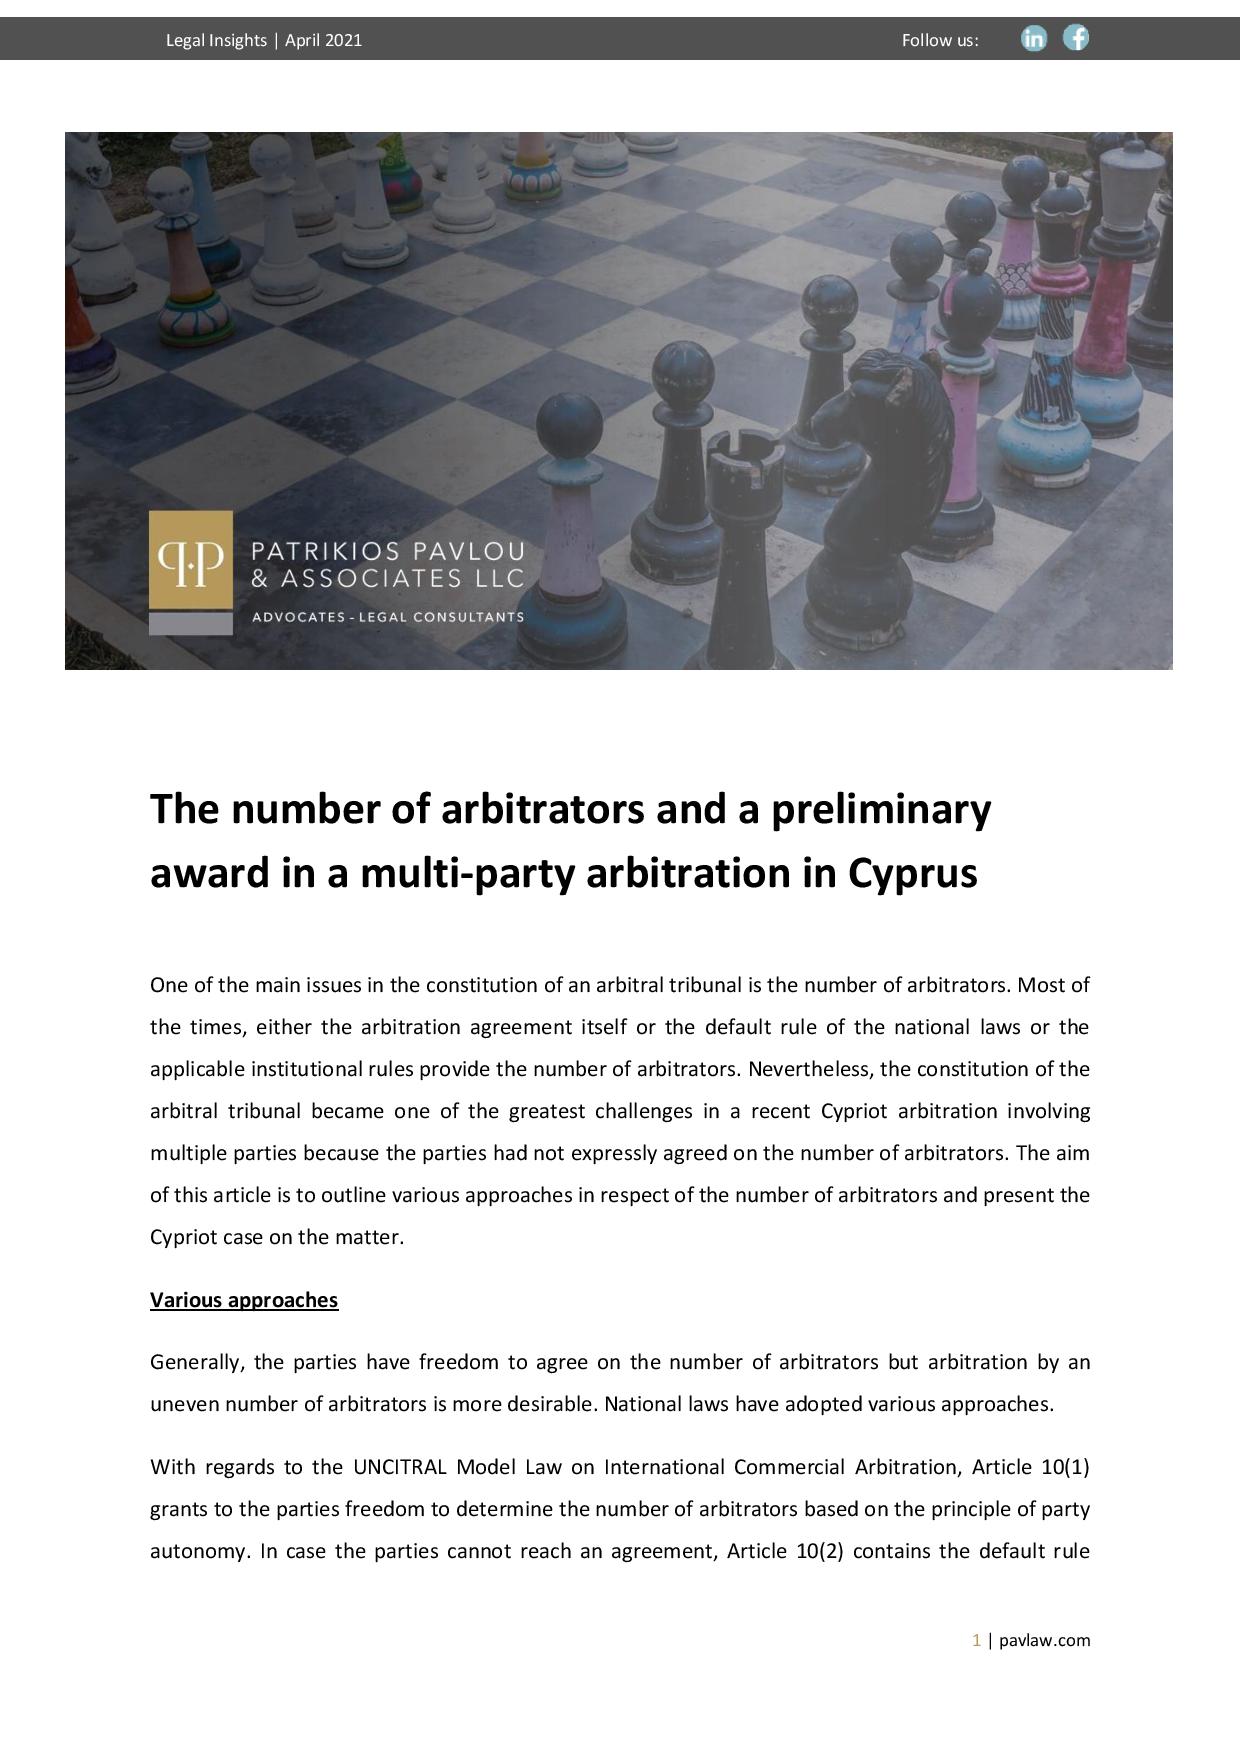 Patrikios Pavlou & Associates LLC: The number of arbitrators and a preliminary award in a multi-party arbitration in Cyprus